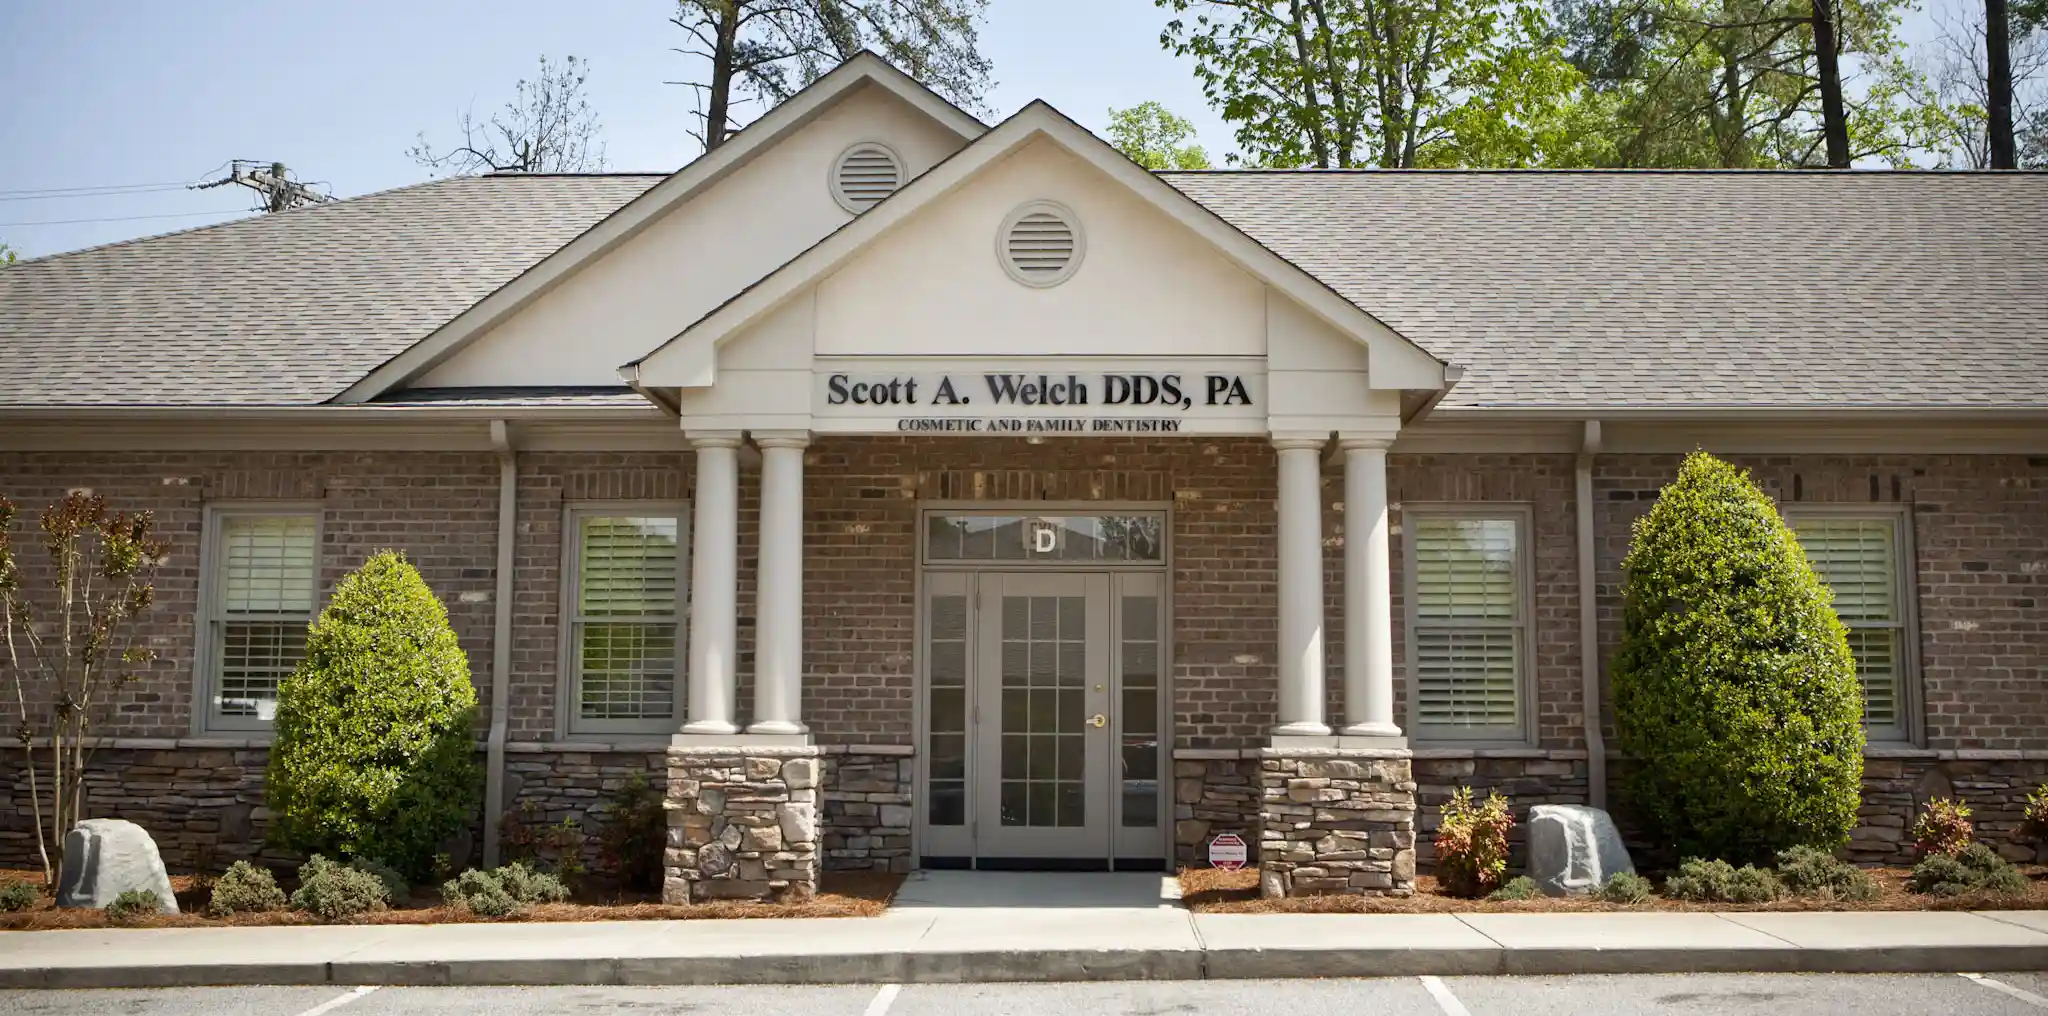 Photo of exterior of Dr. Welch's New Garden dentist office